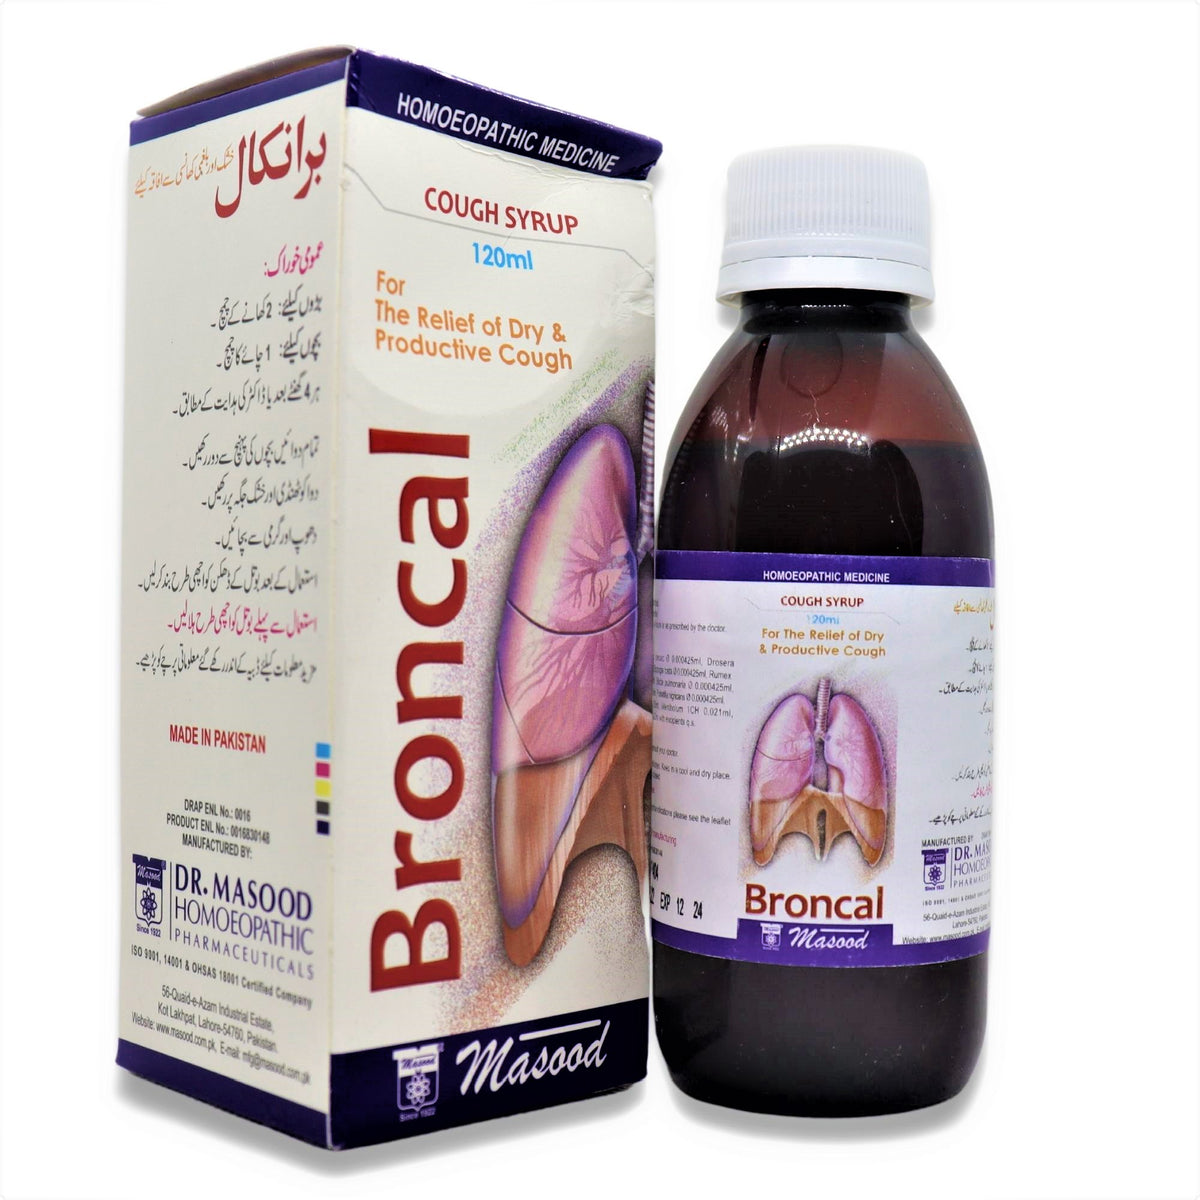 BRONCAL COUGH SYRUP